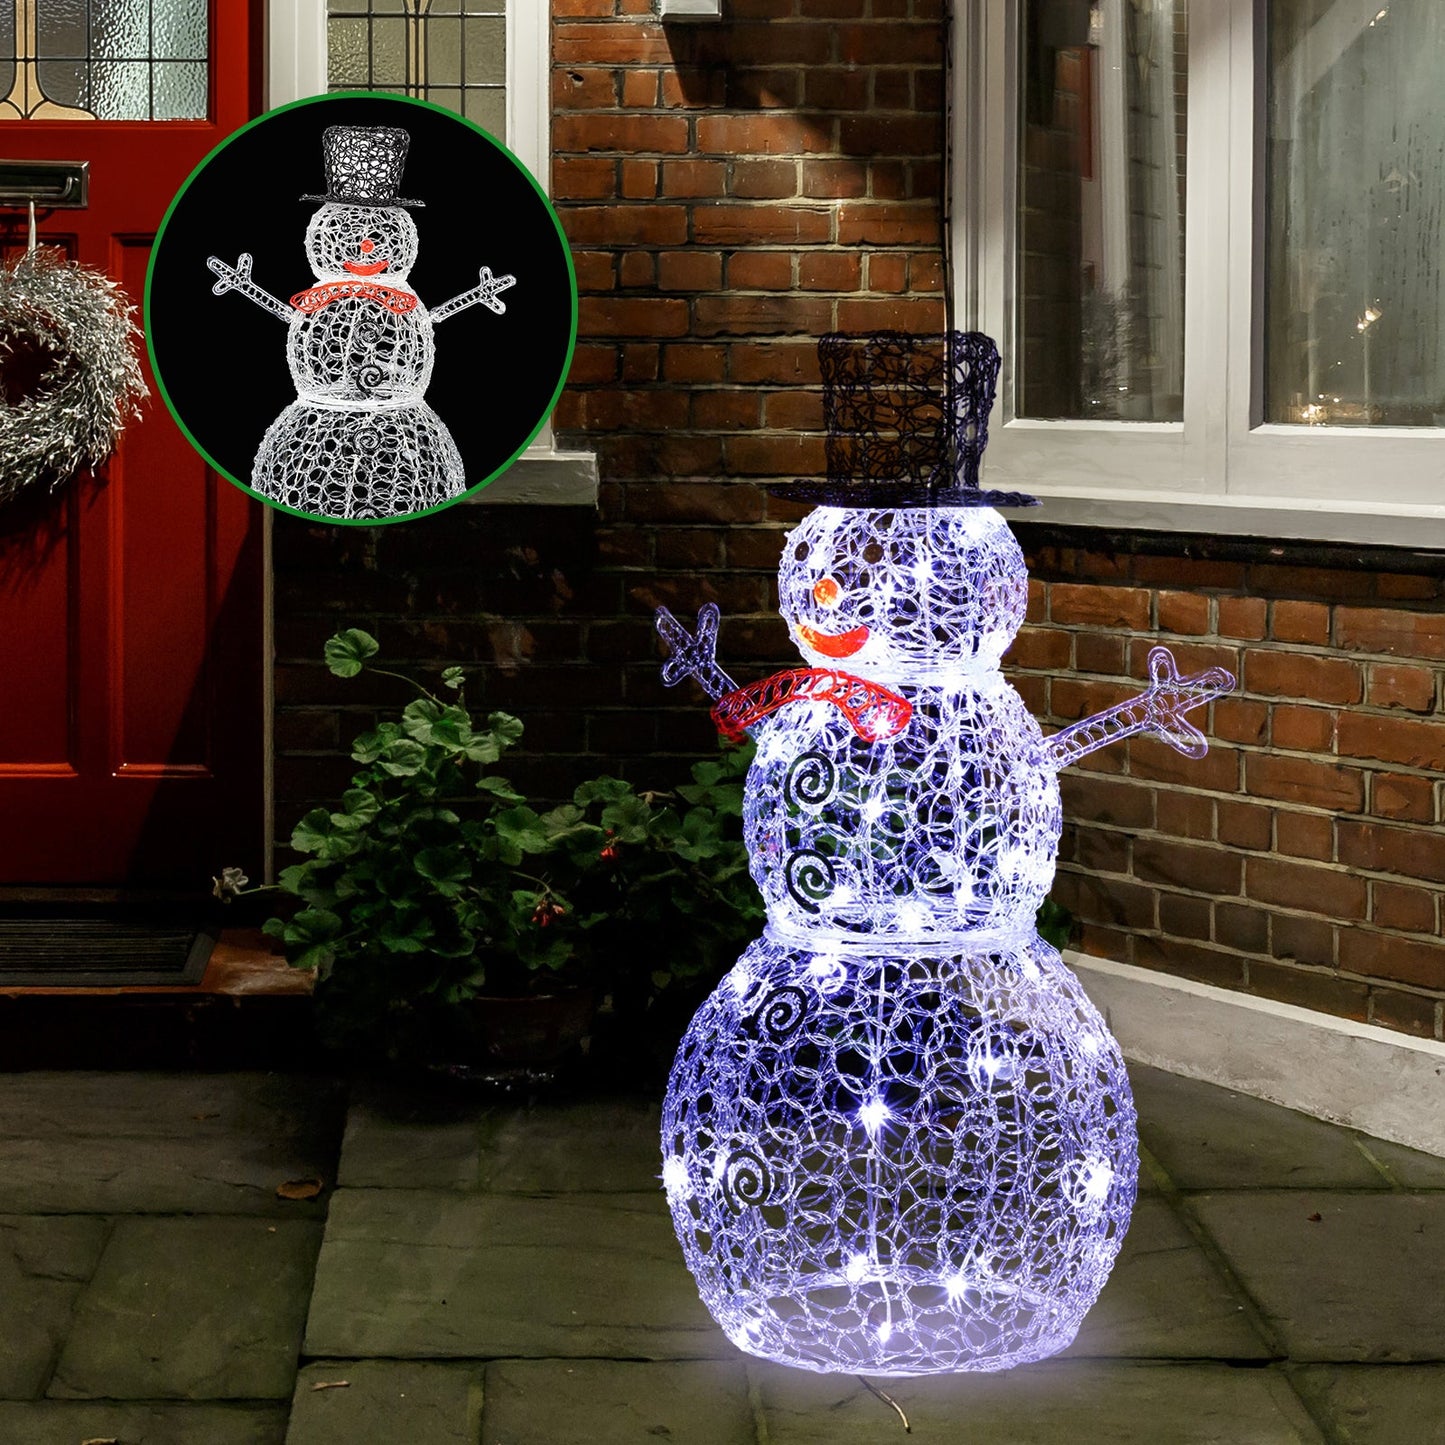 3ft Clear Acrylic with 100 String Lights Garden Snowman Decoration hello-826